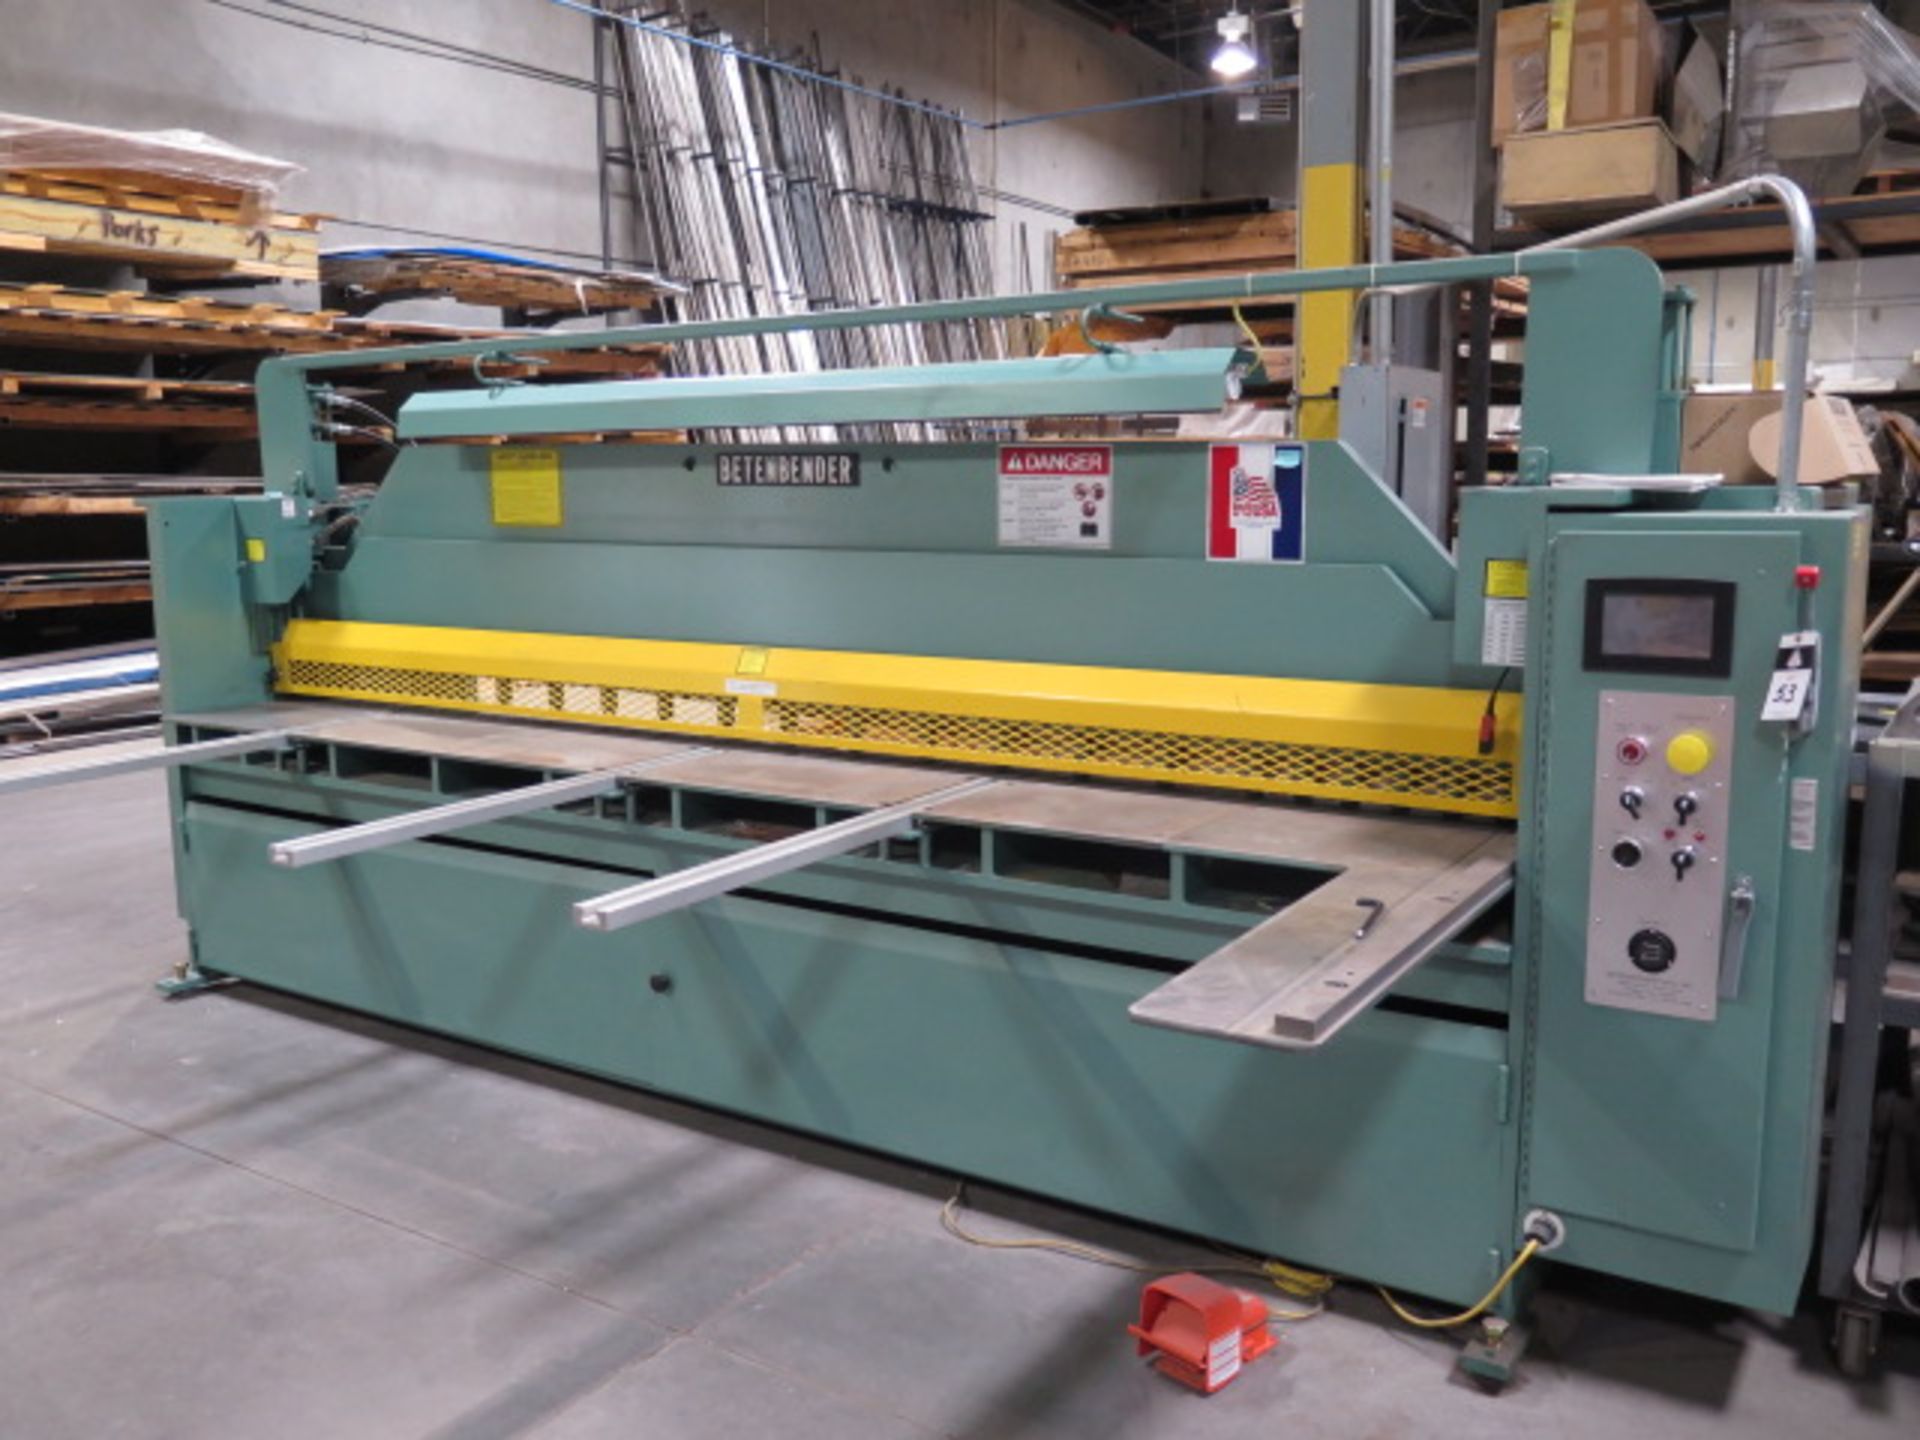 Betenbender mdl. 12-1/4 12’ X .25'' Power Shear s/n 262919 w/ PLC Controls, 53” Squaring, SOLD AS IS - Image 2 of 13